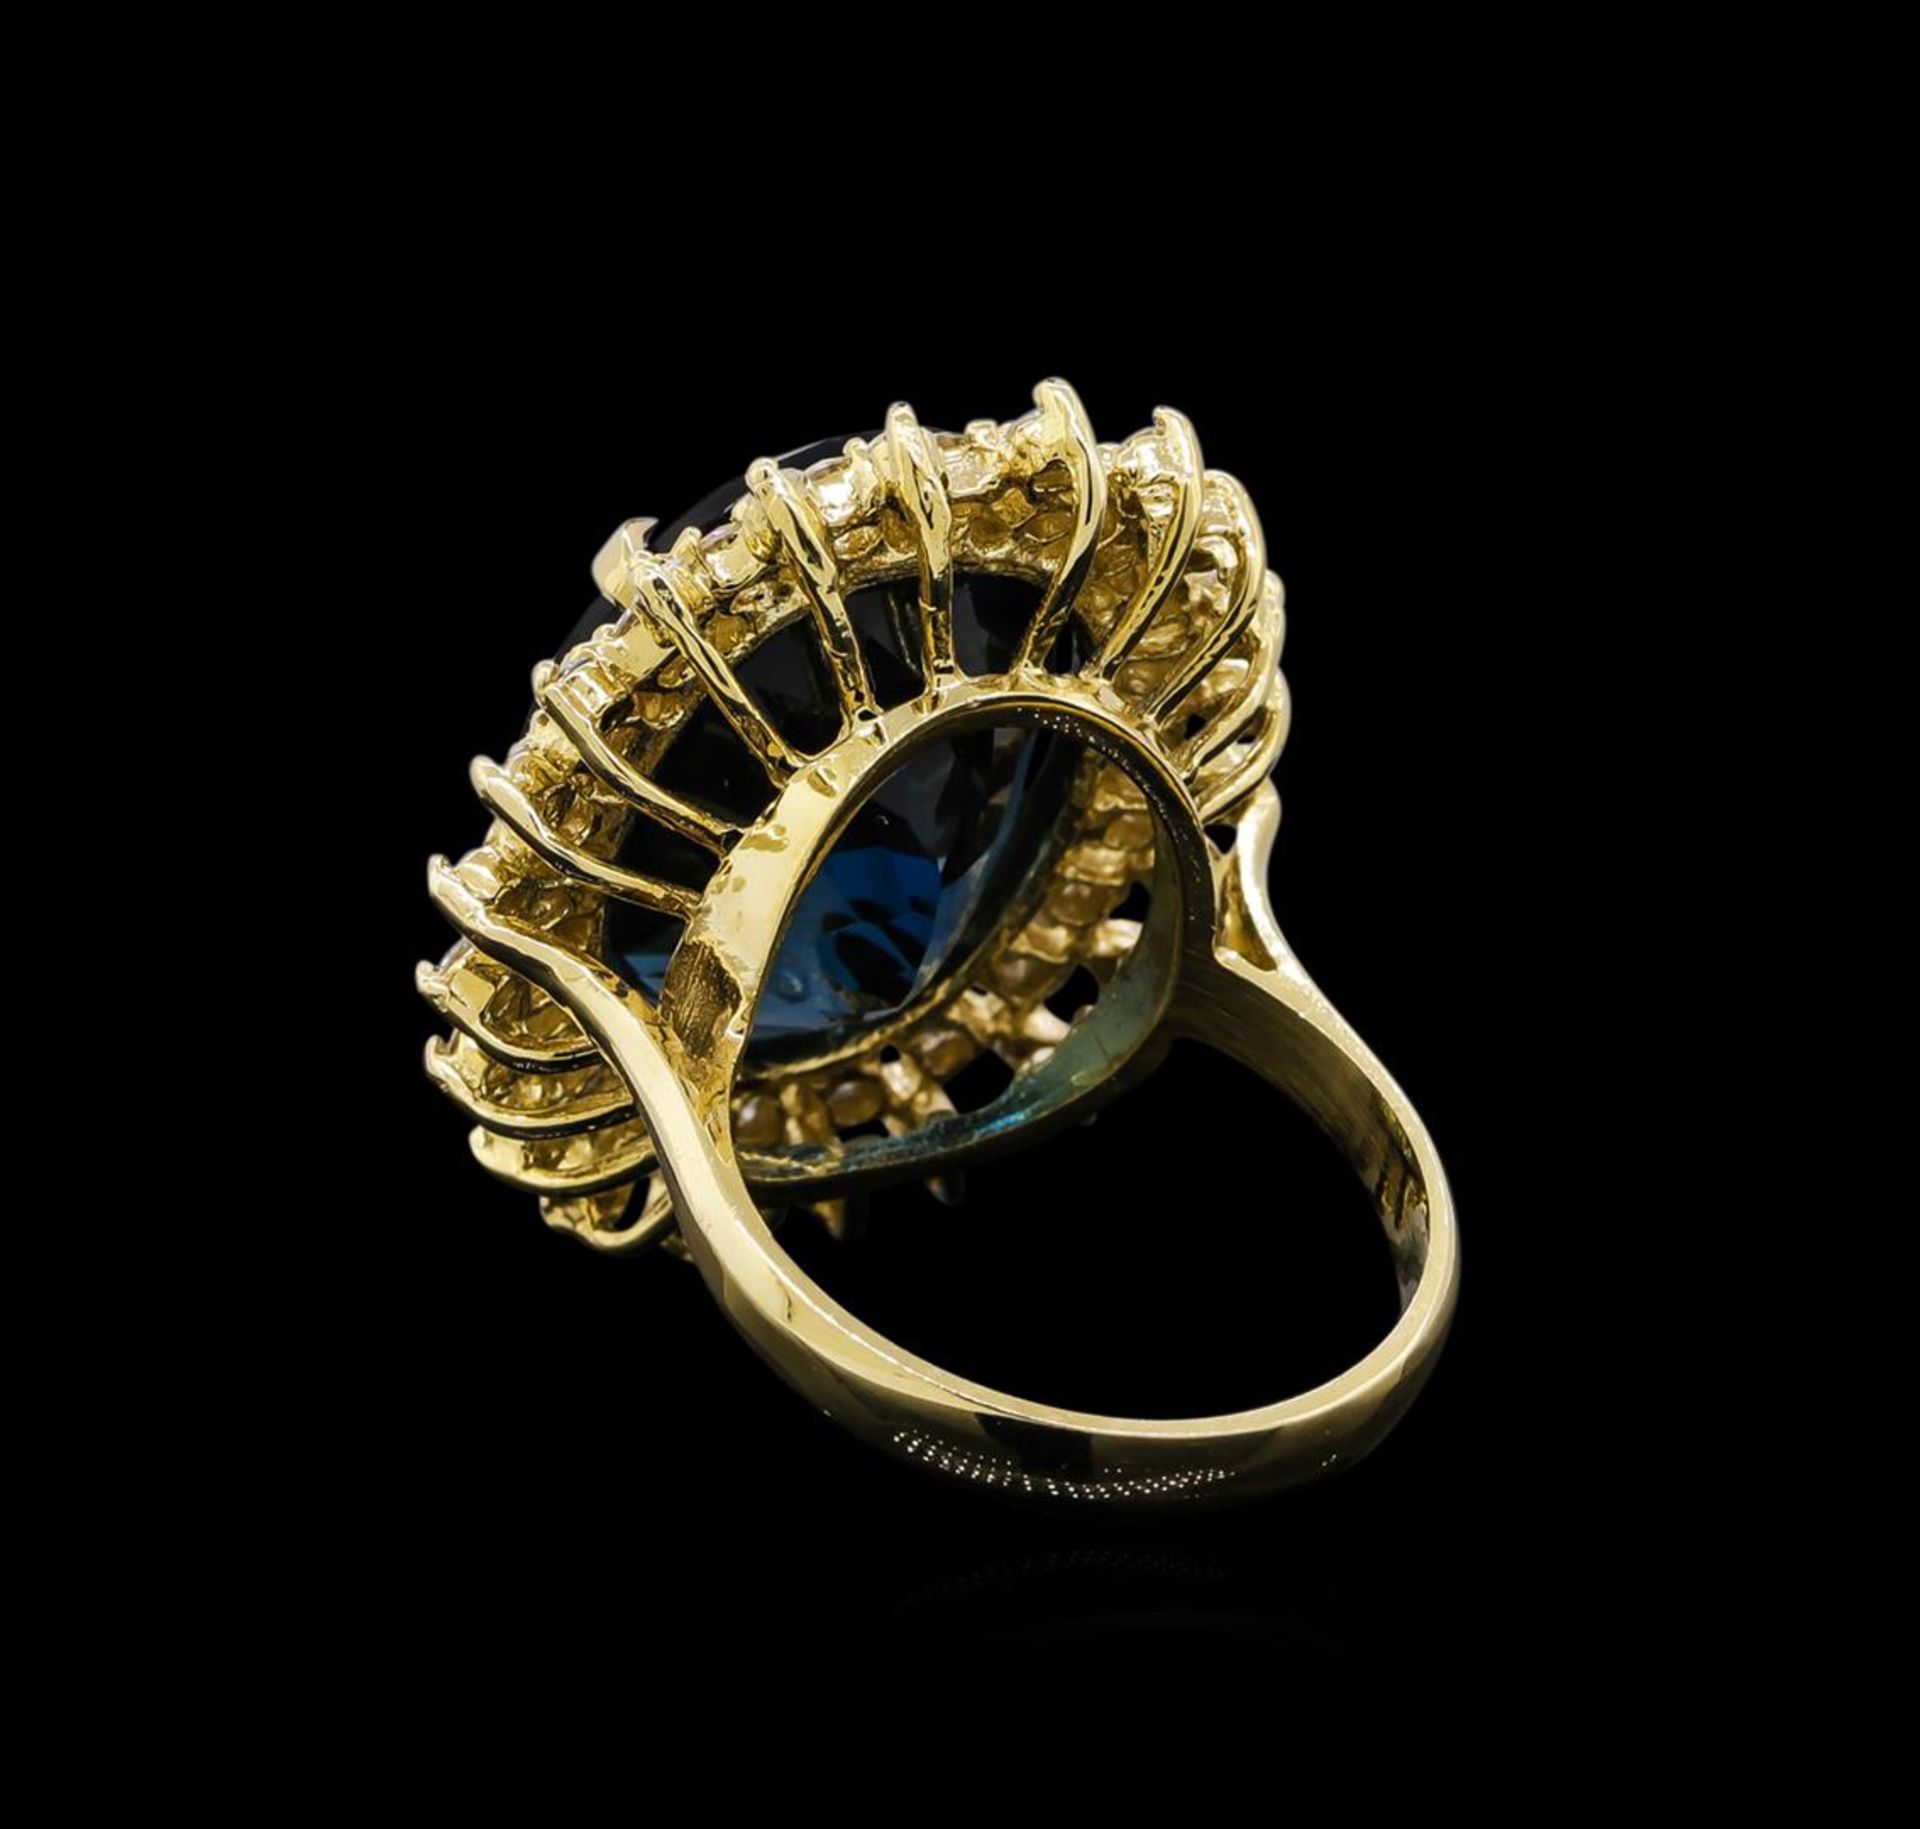 14KT Yellow Gold 22.70 ctw Topaz and Diamond Ring - Image 3 of 5